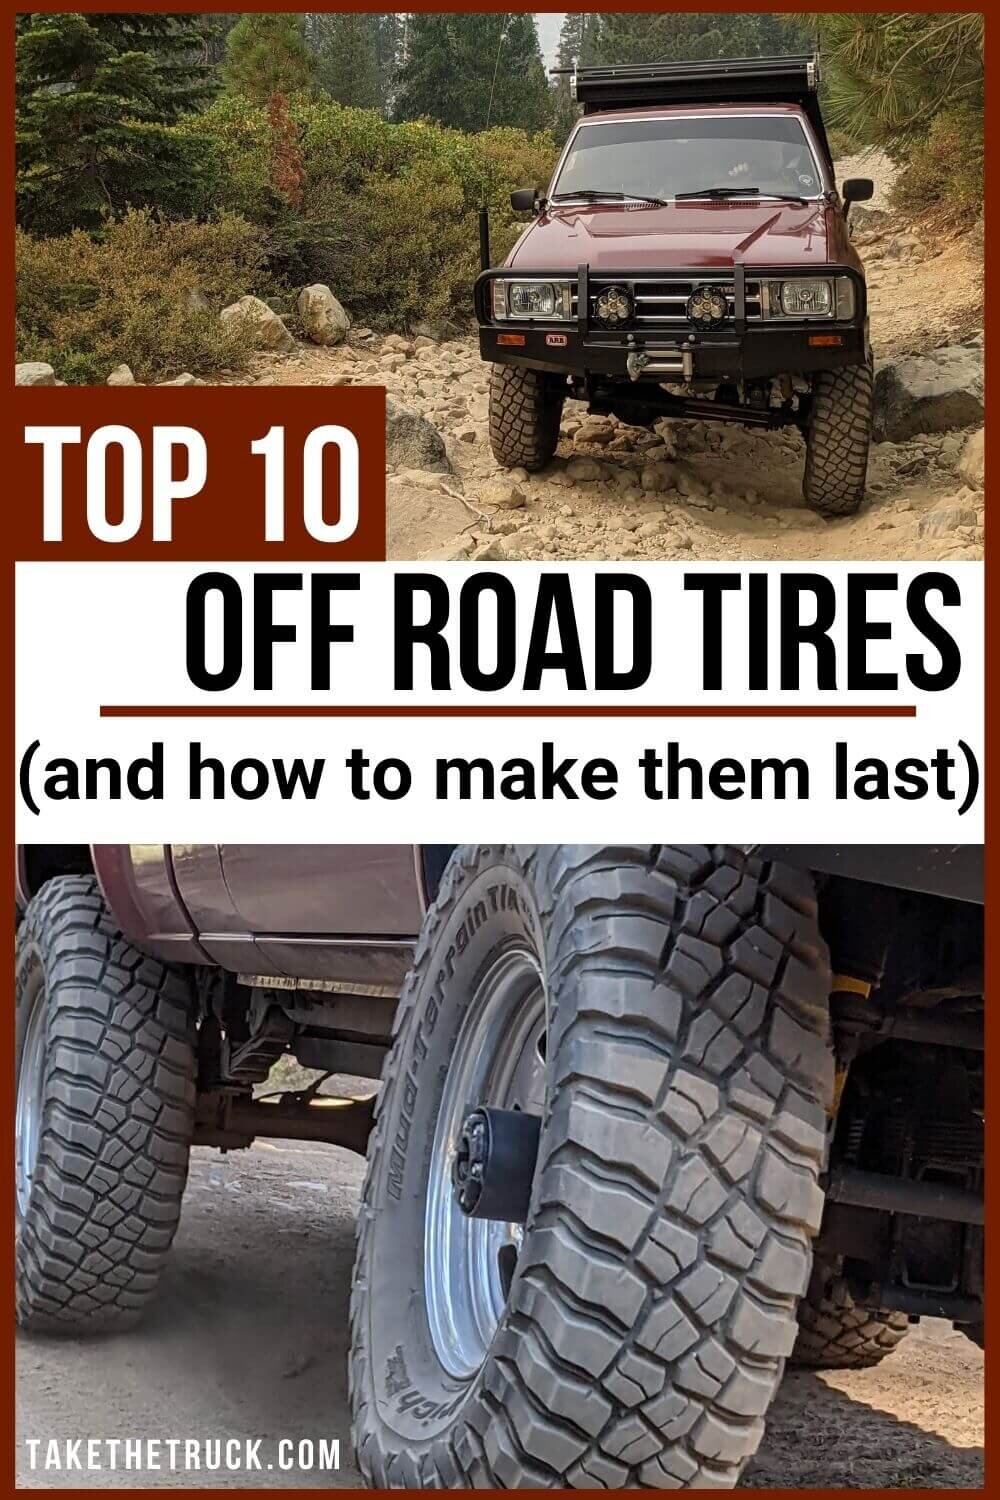 Find overland tires or off road tires for your overlanding vehicle. Learn how to choose between all terrain truck tires, hybrid tires, or mud terrain tires - plus 10 specific overlanding tires!